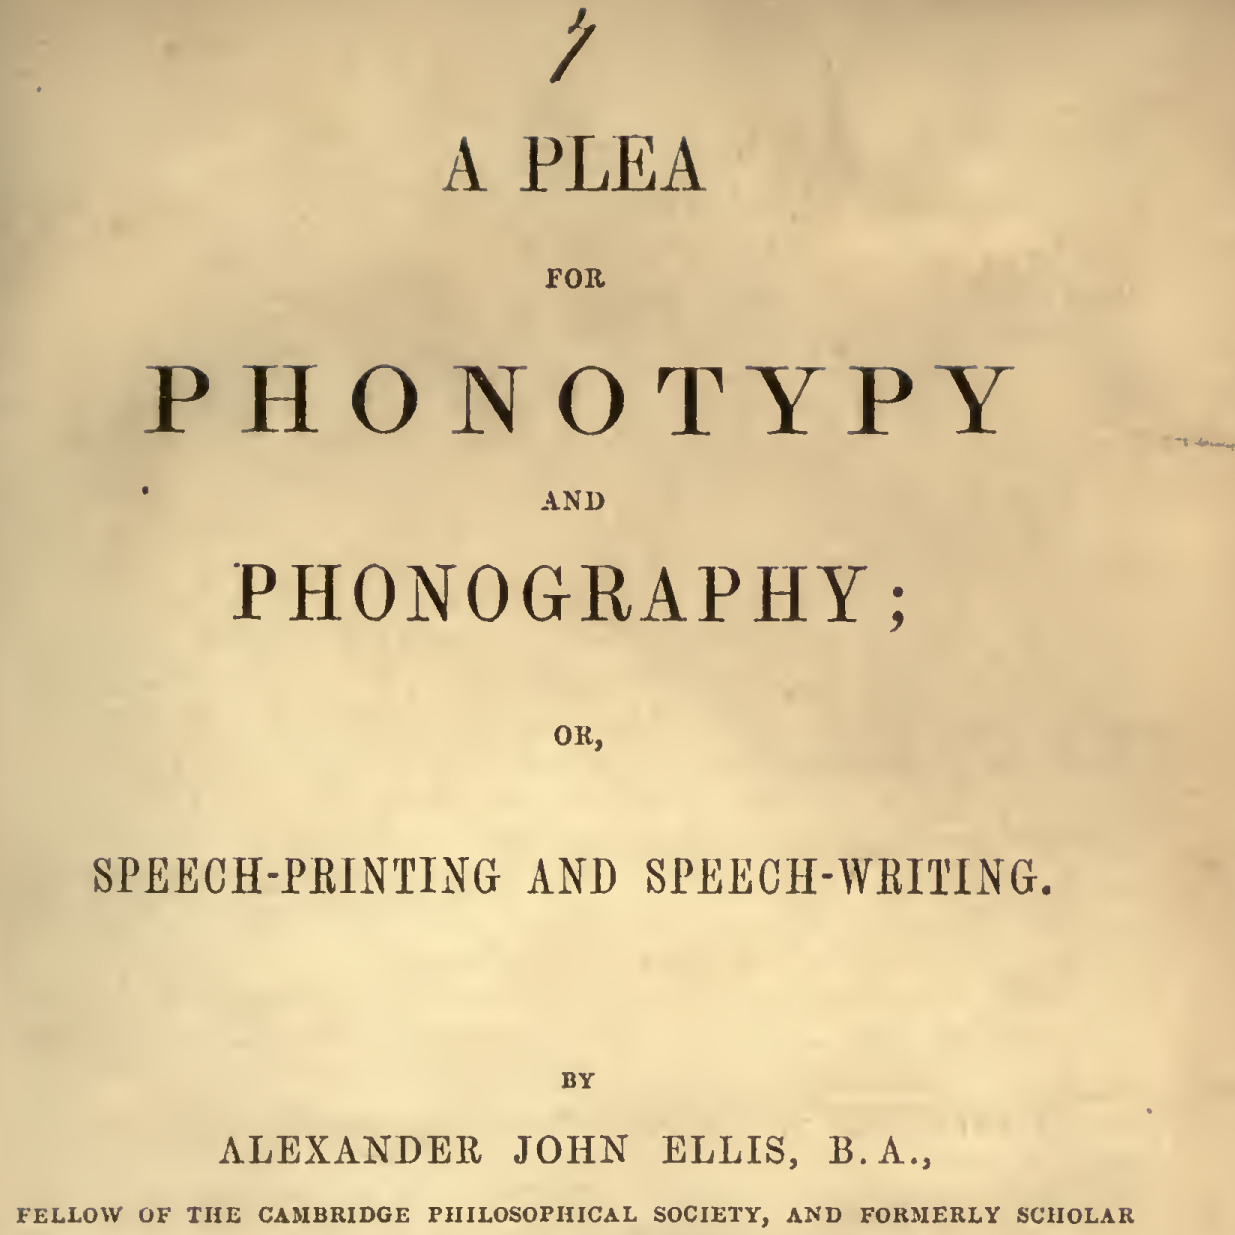 A plea for phonotypy and phonography